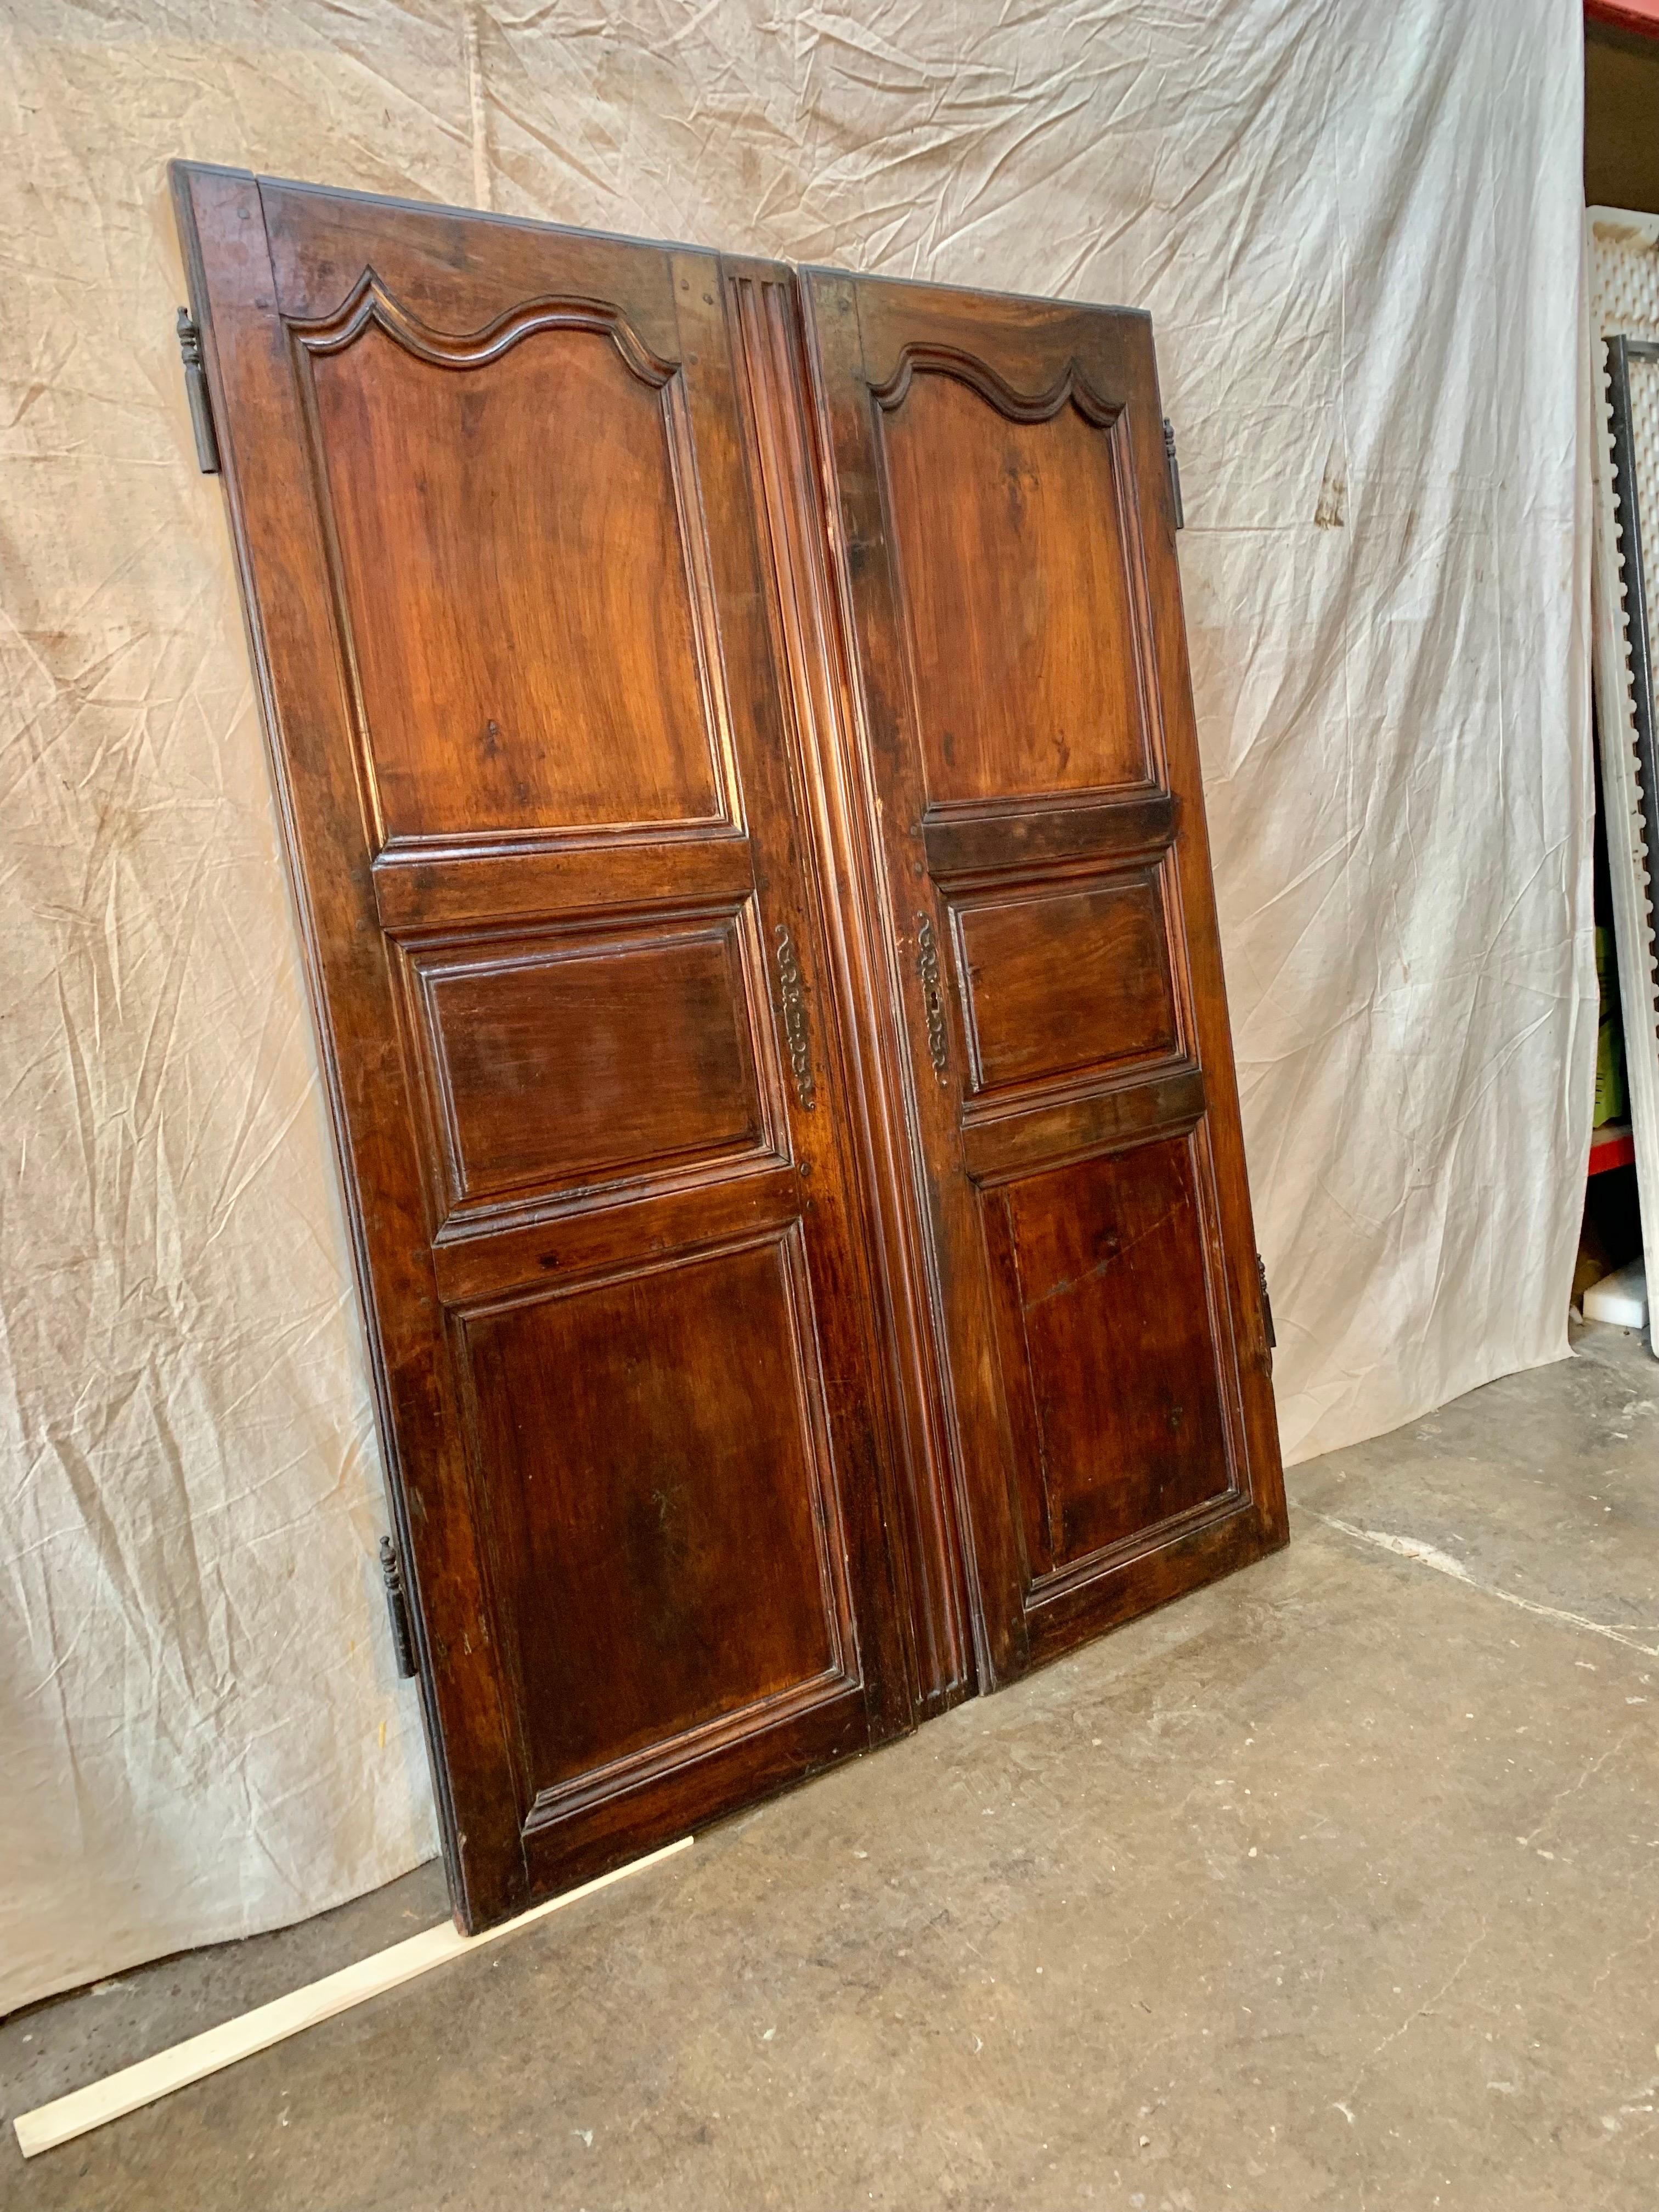 Found in the South of France, this pair of 19th Century French Armoire Doors once graced a beautiful armoire that was made in the 1800's. Hand crafted from walnut, each door displays three panels, the original escutcheon plate and partial hinge.